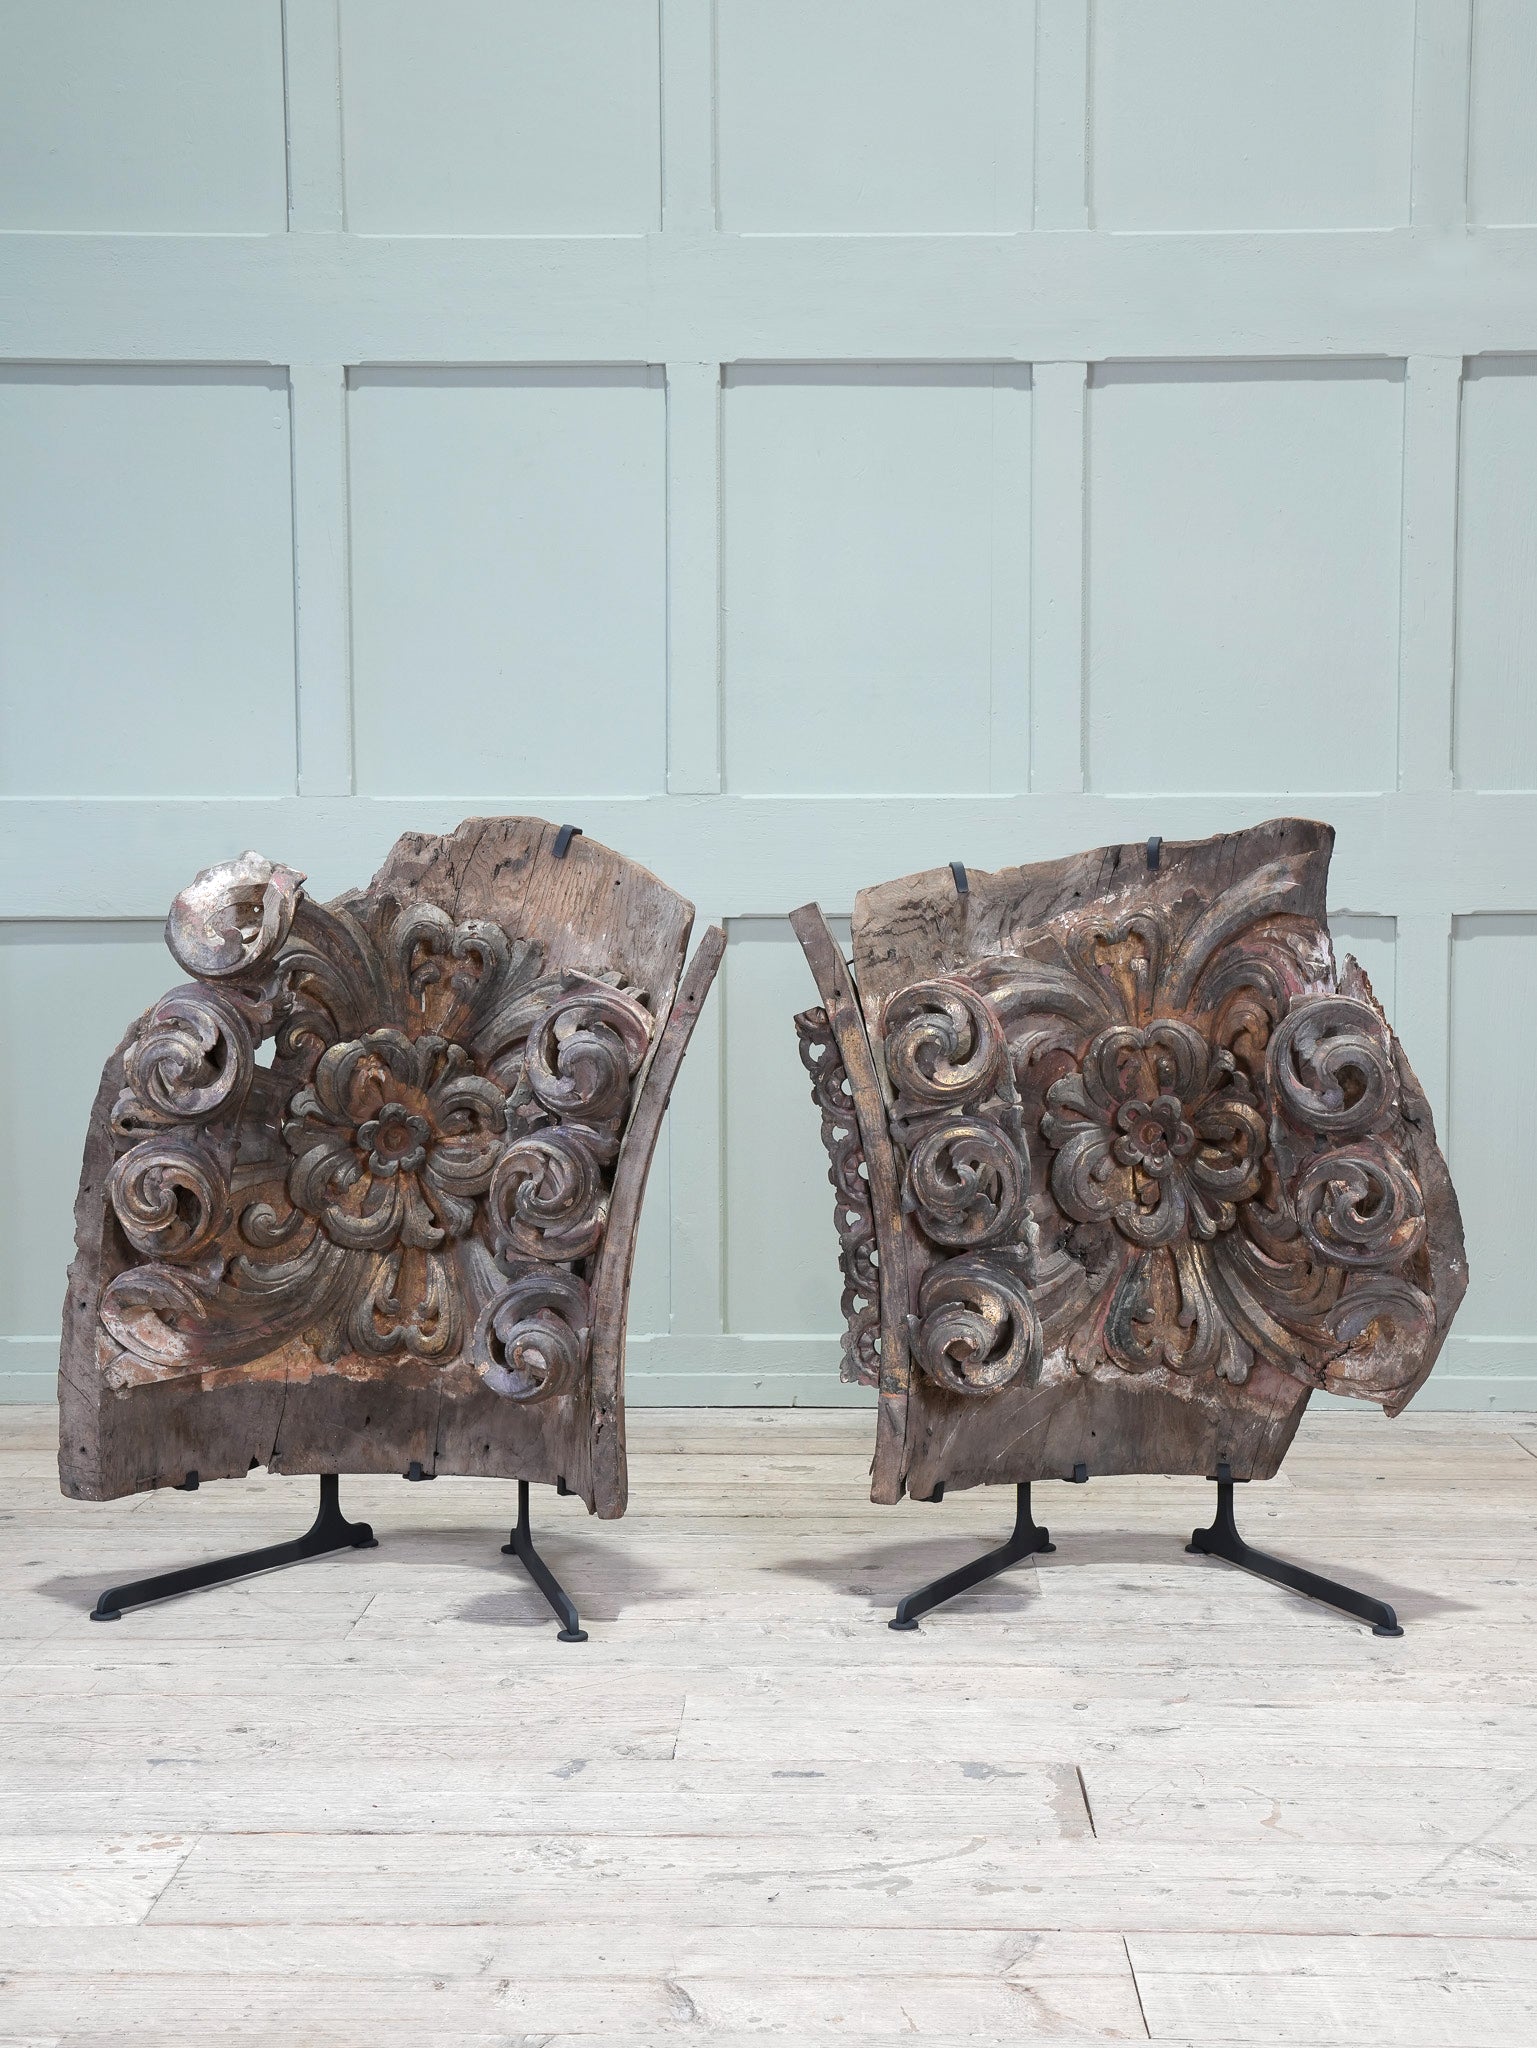 A Pair of 18th Century Baroque Architectural Elements